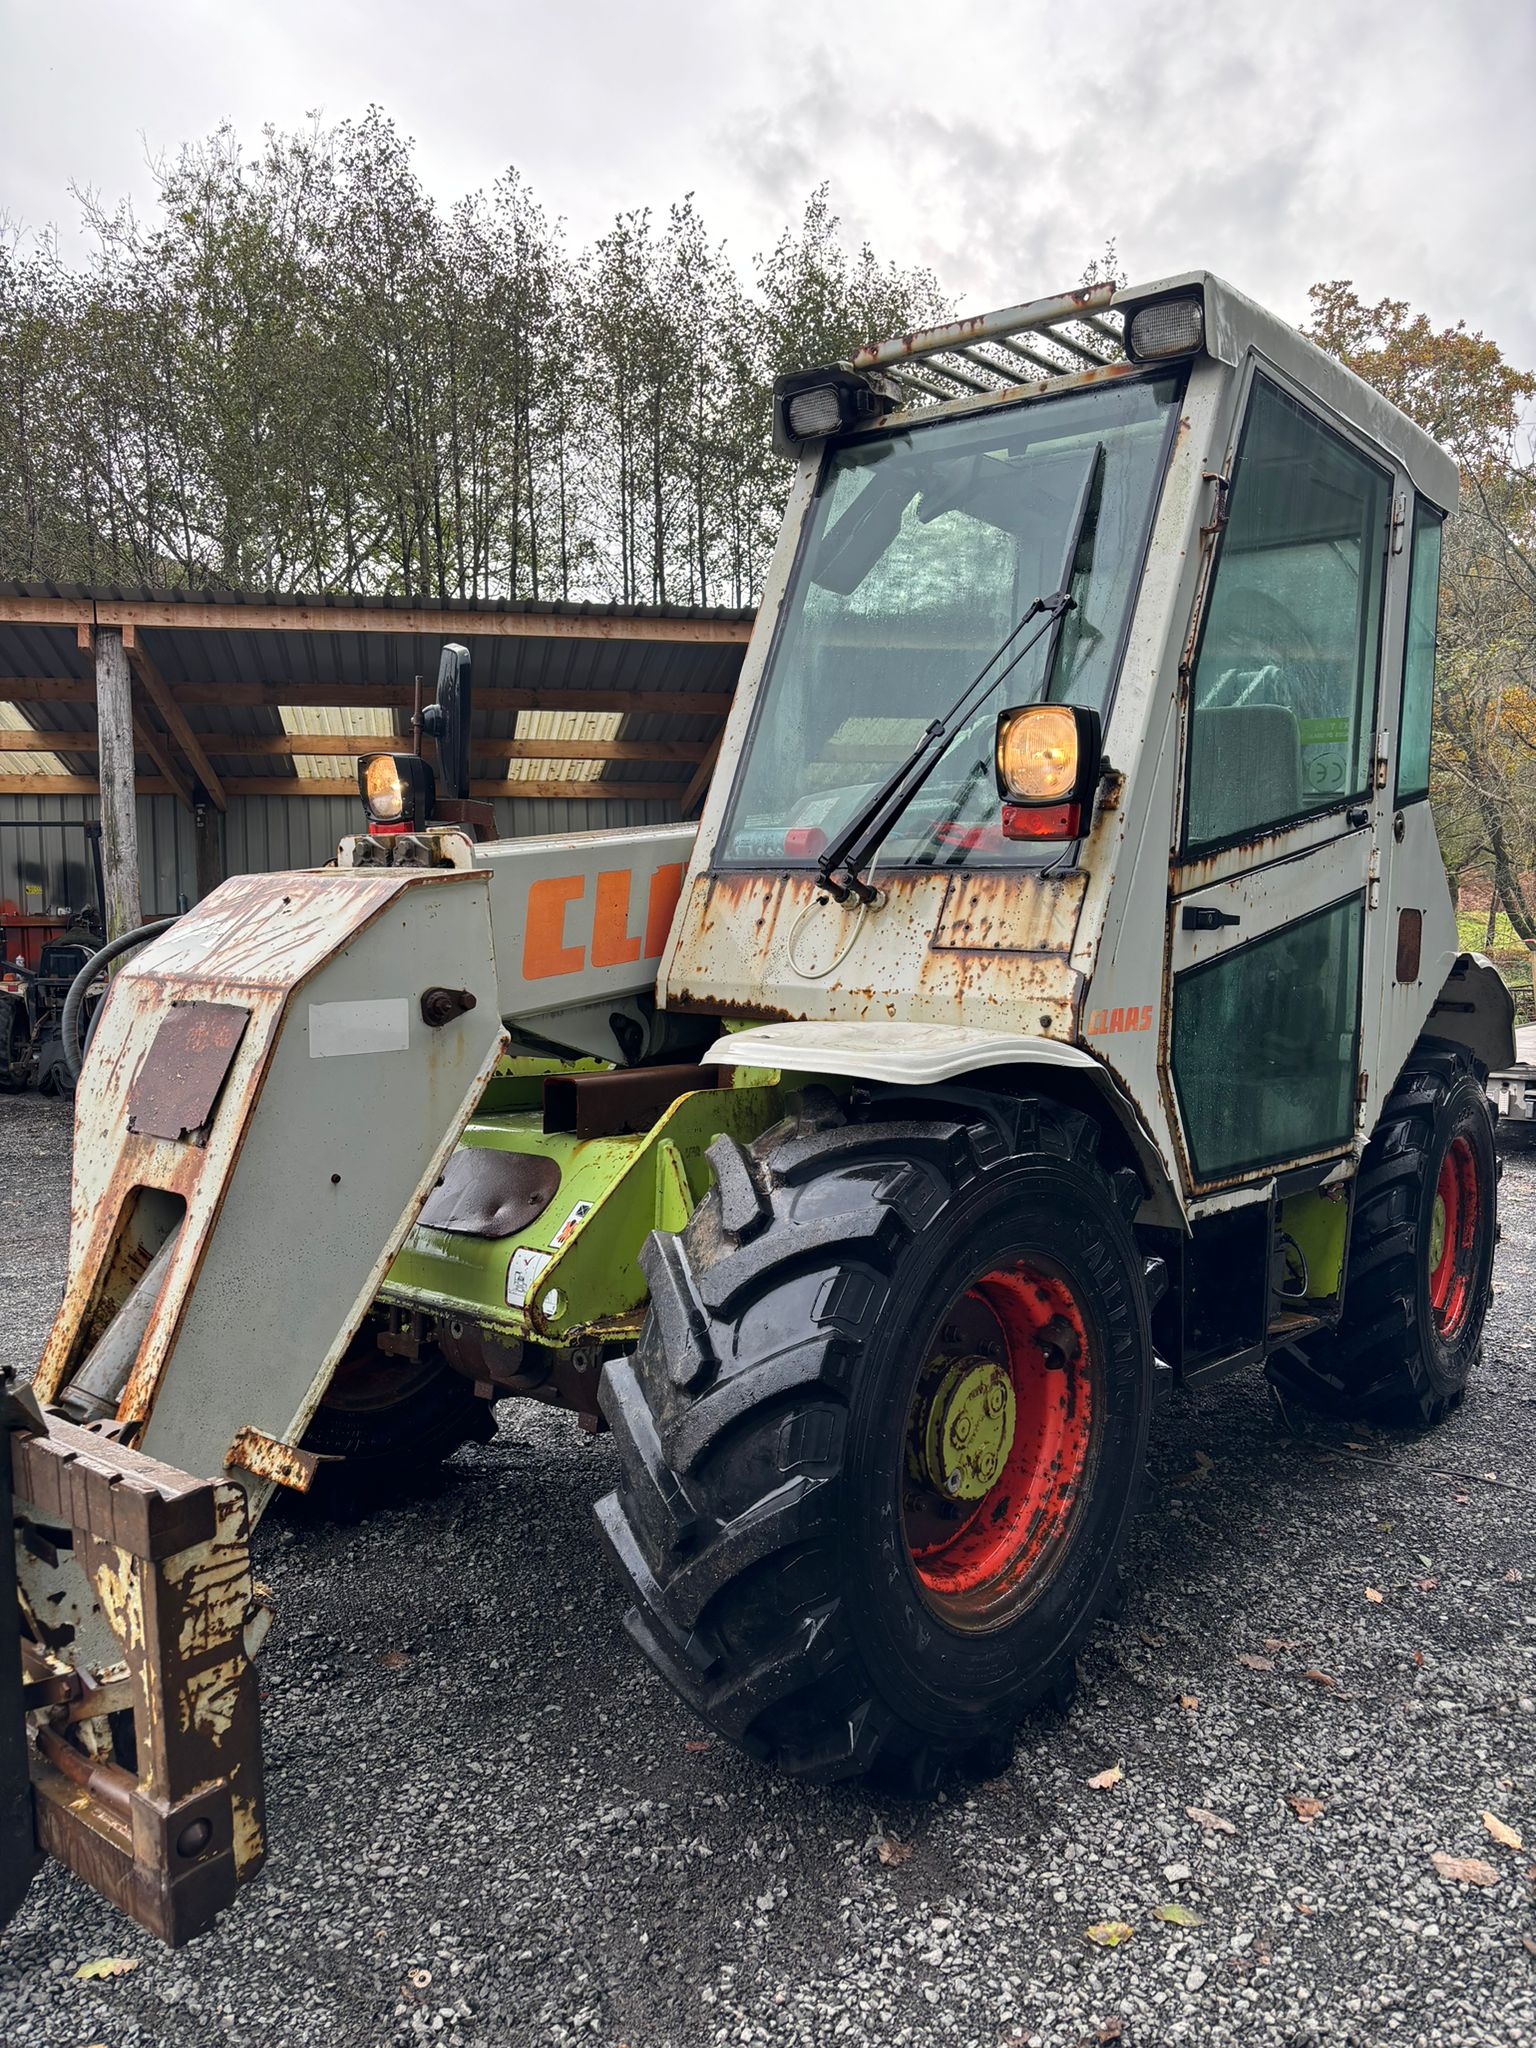 Bid on MATBRO MASTERY: 4X4 LOADALL WITH PERKINS TURBO - CRAB/FRONT/4 WHEEL STEER- Buy &amp; Sell on Auction with EAMA Group